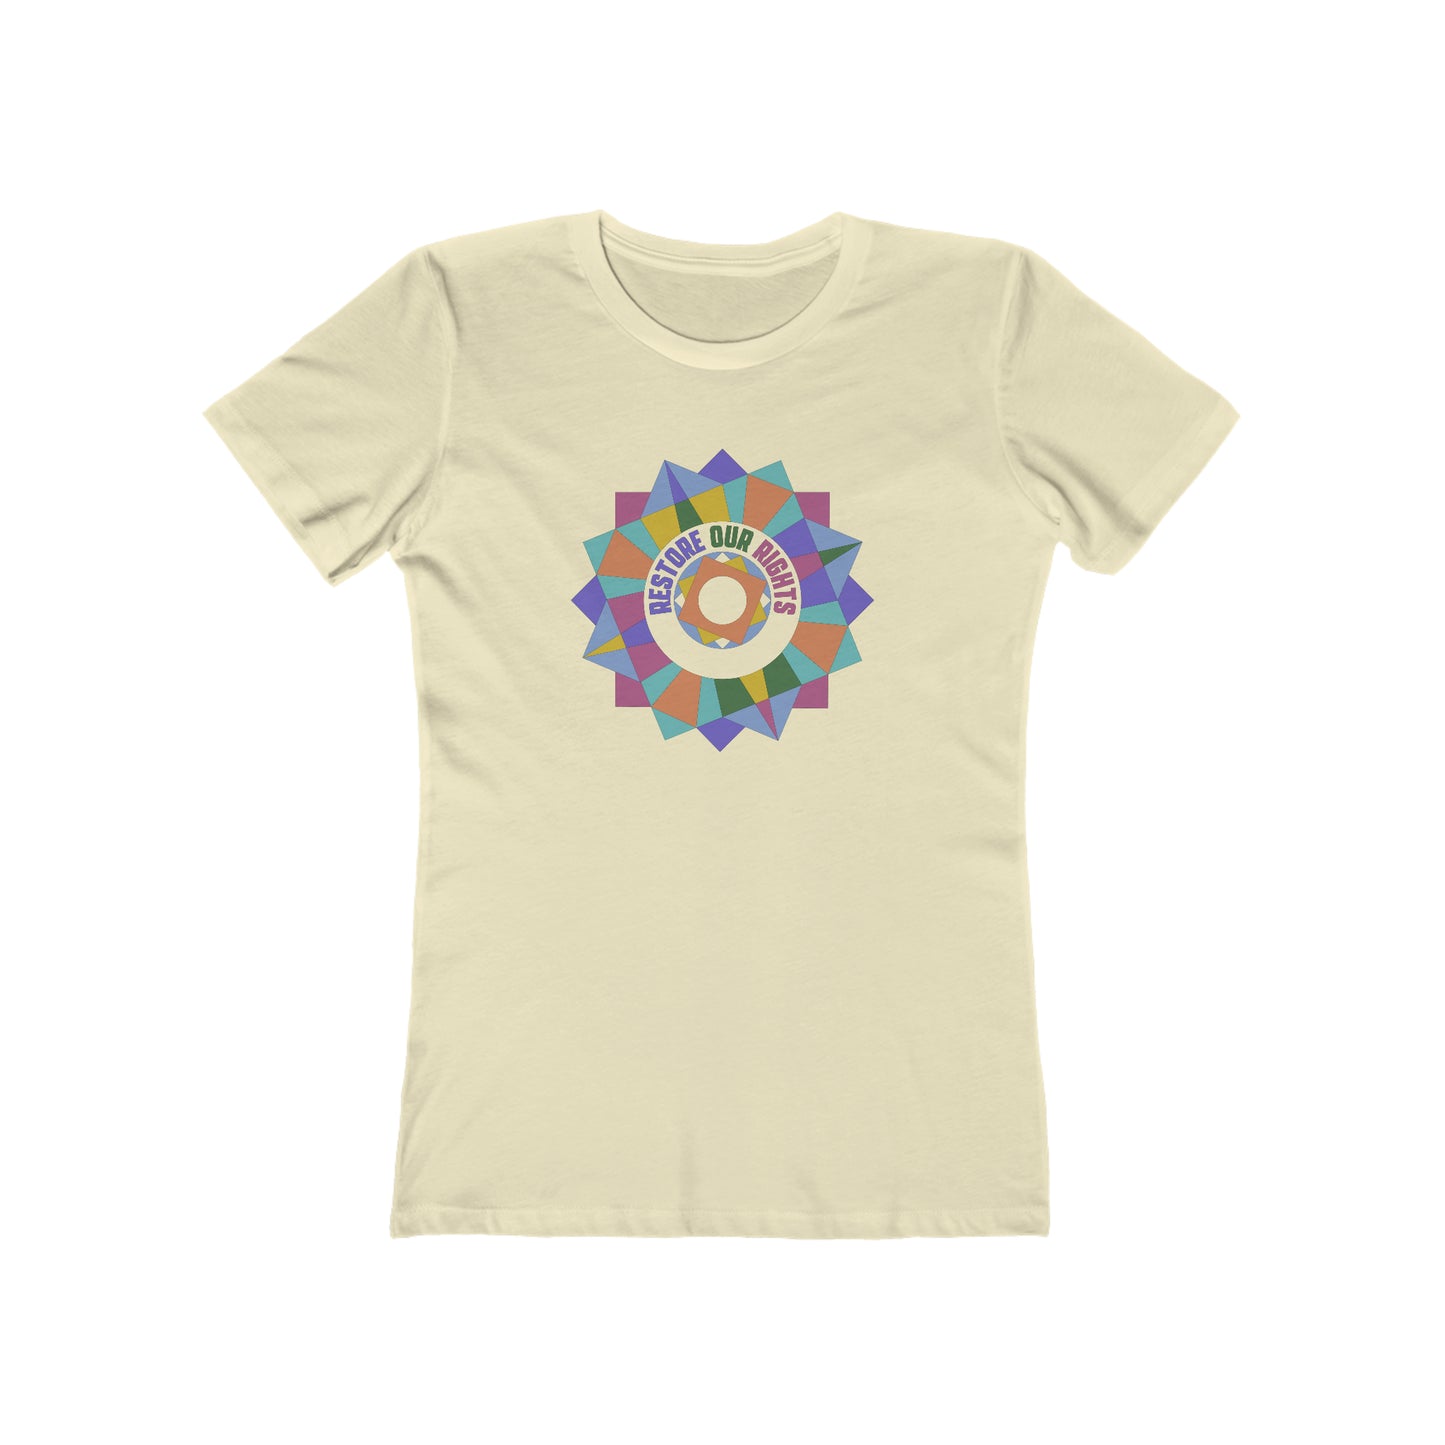 Restore Our Rights - Women's T-Shirt